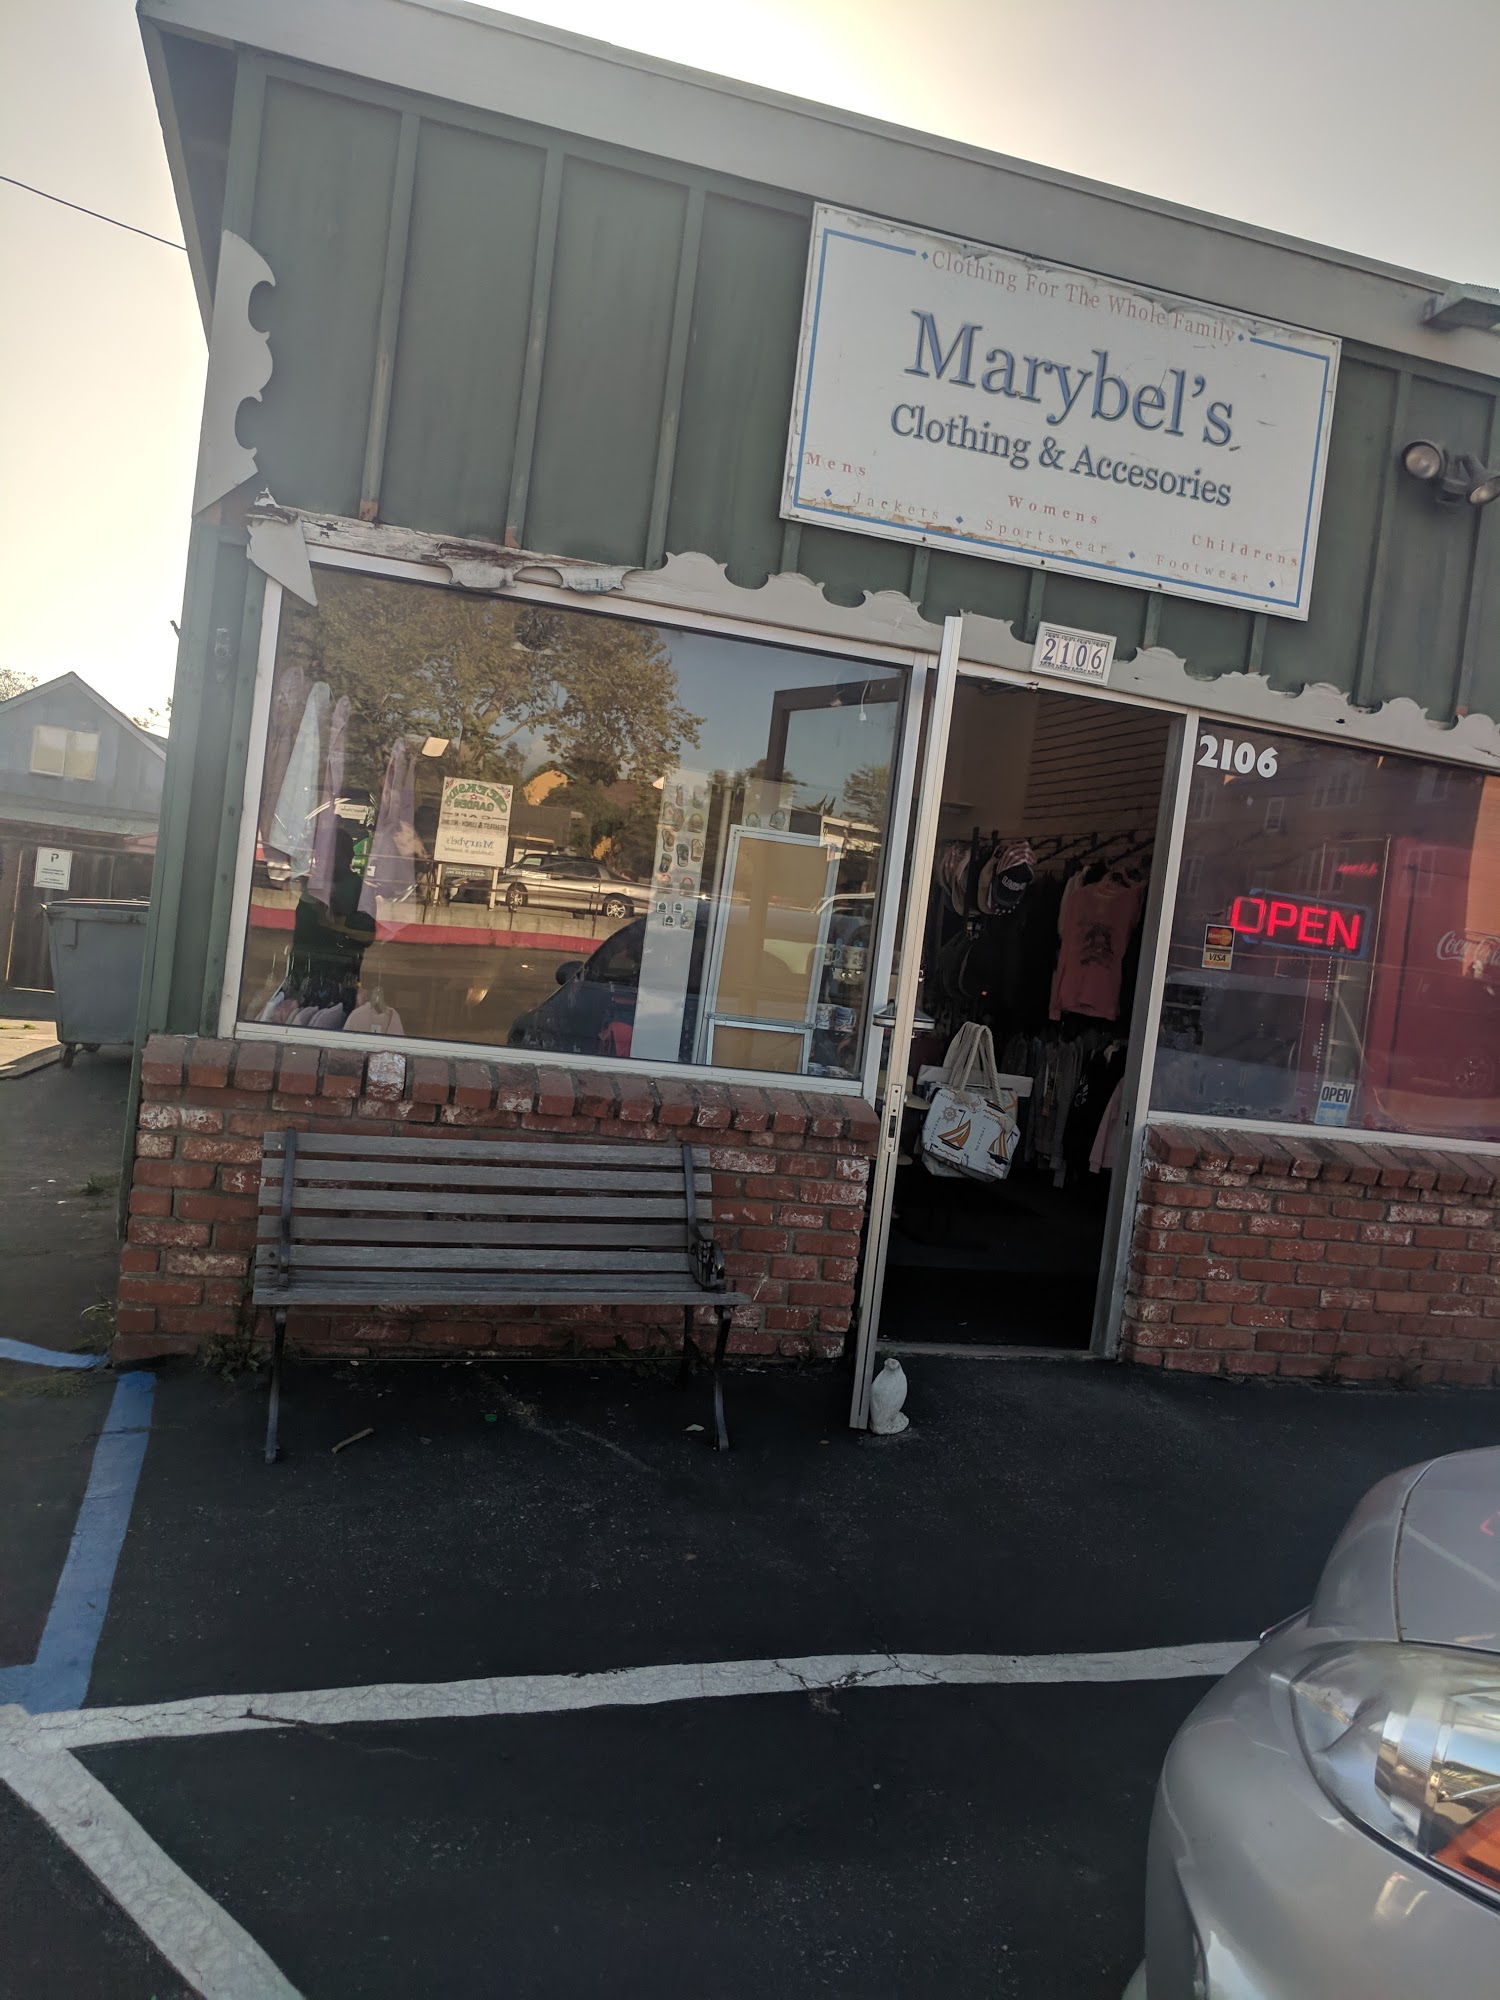 Marybel's Clothes & Accessories